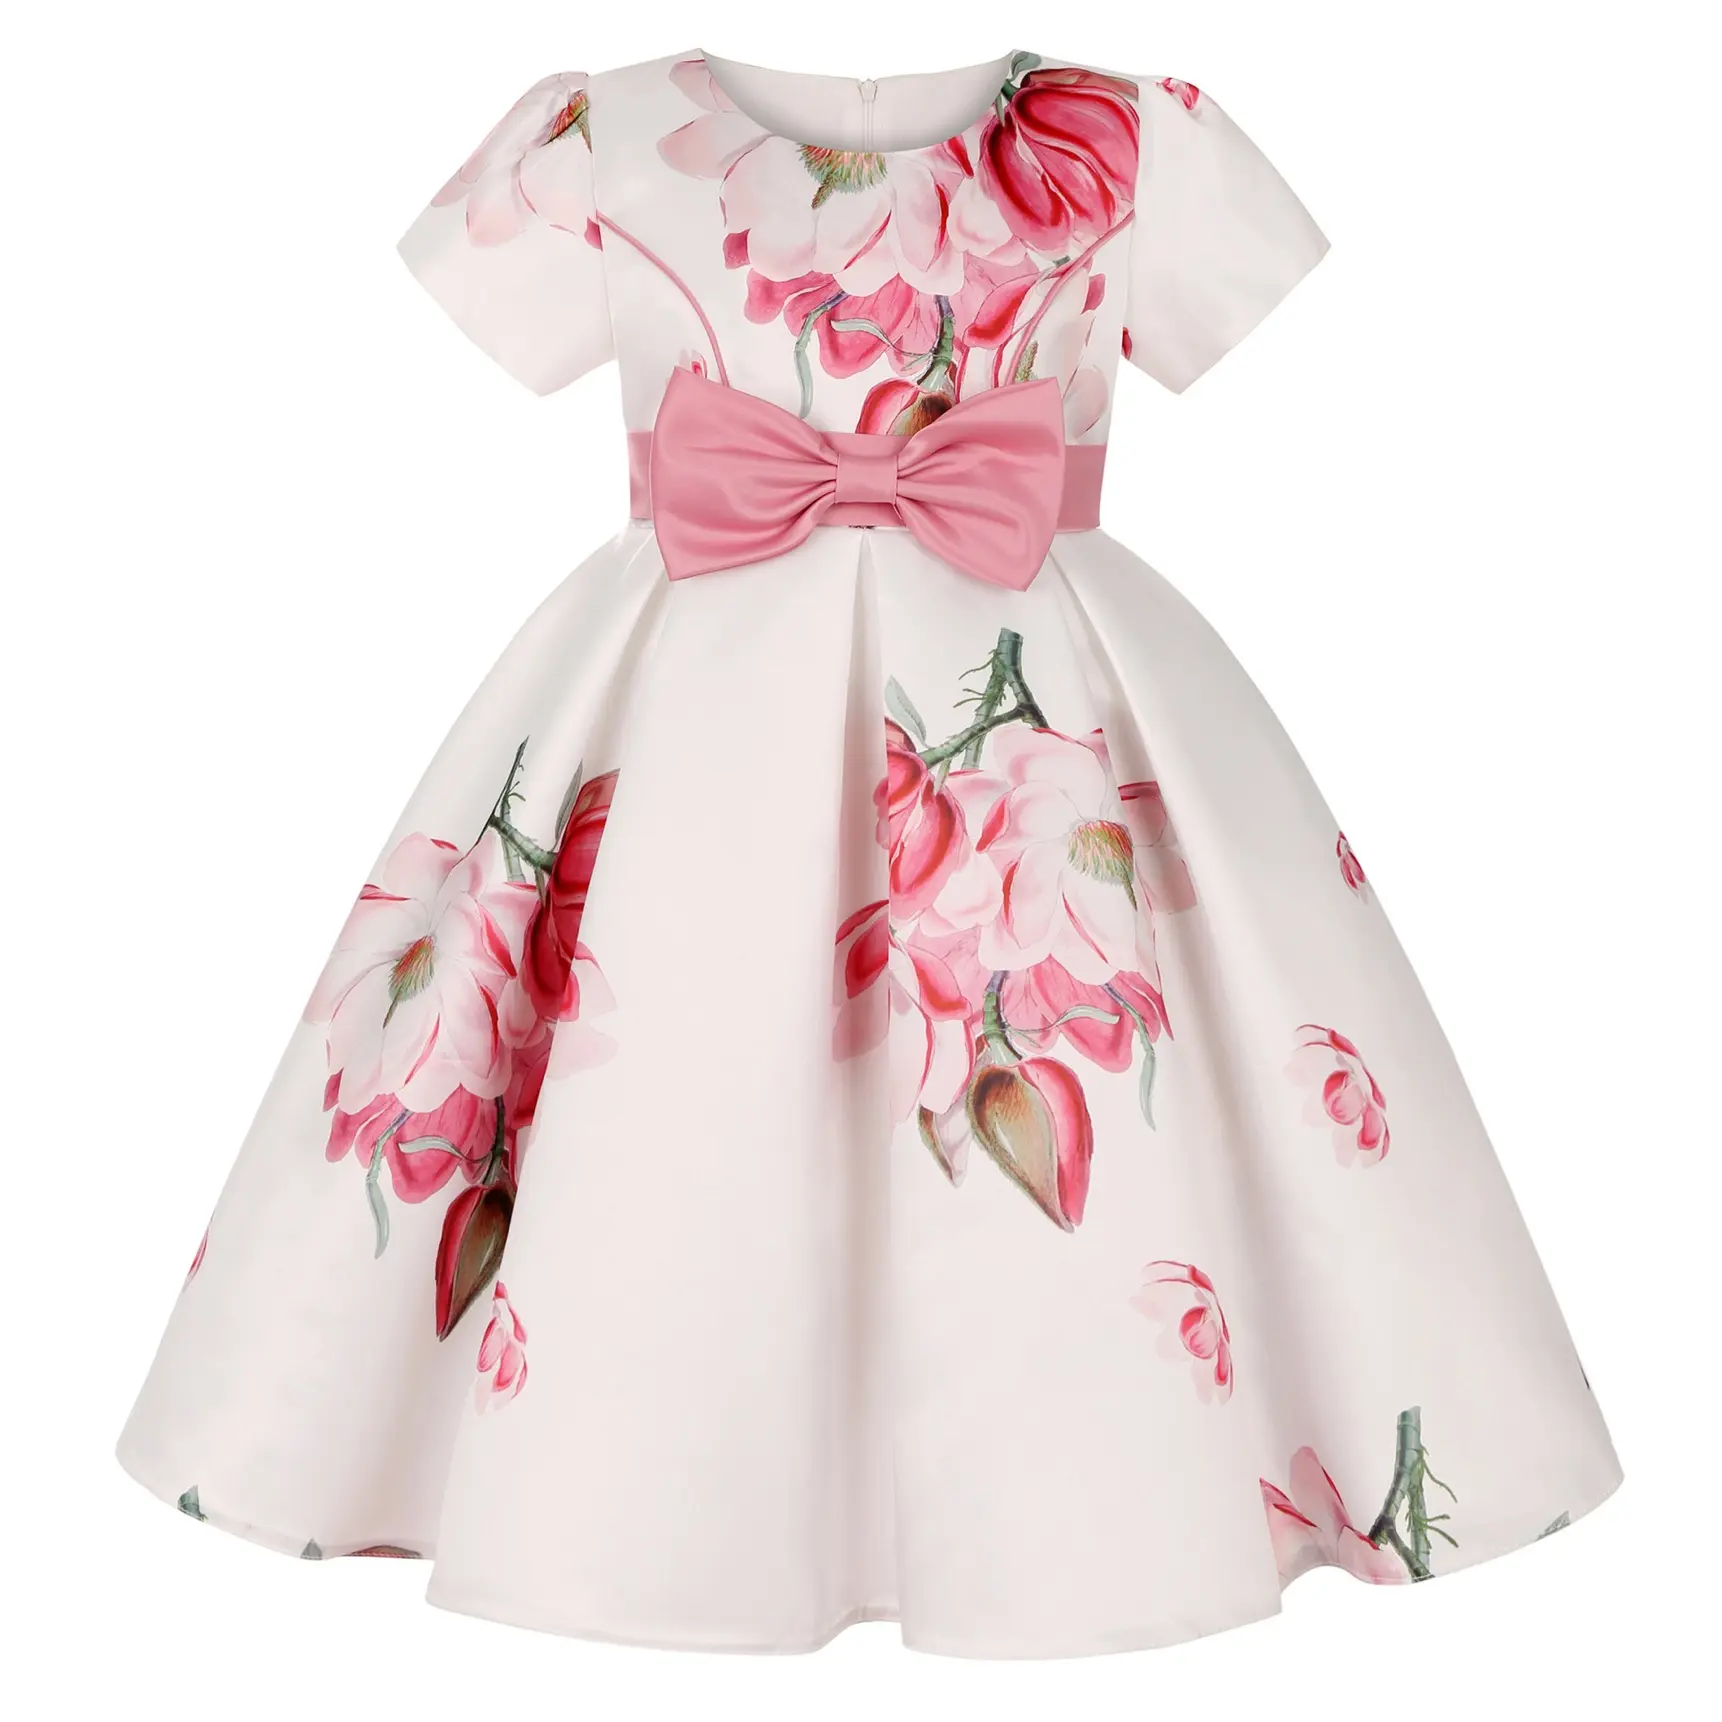 New Style Chic Girls Party or Wedding Dress for Age 2-12 Years Formal Elegant Flower Girls' Princess Dress